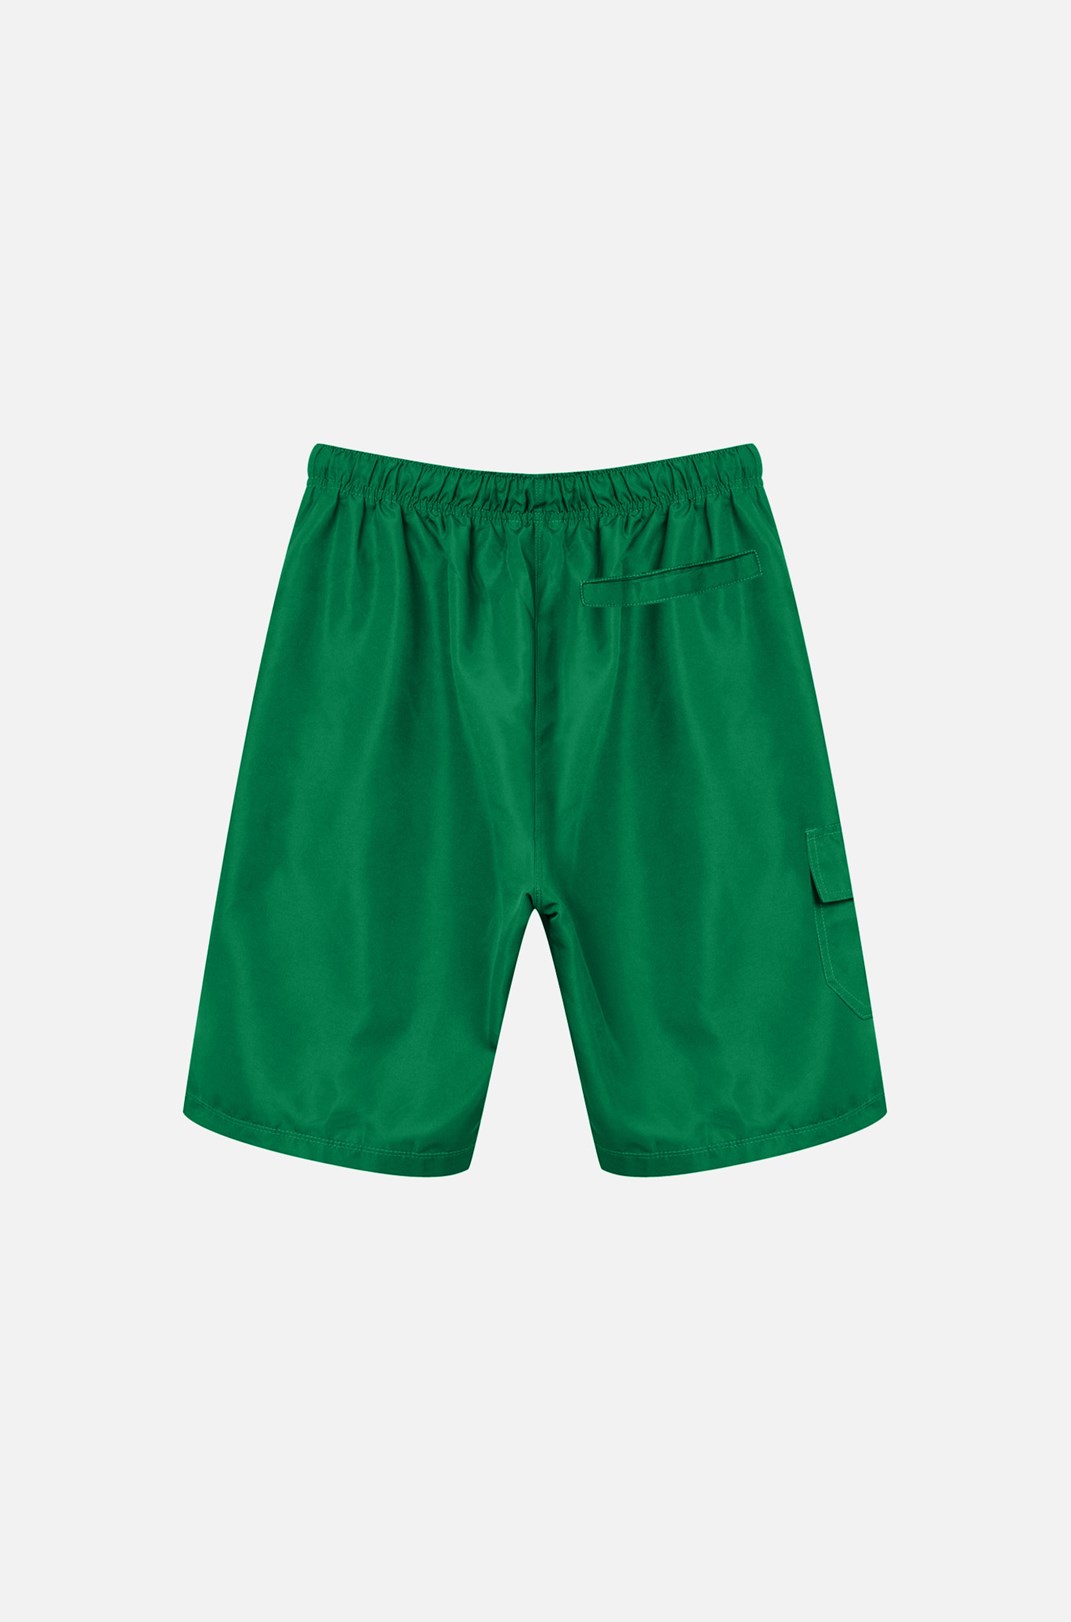 Shorts 9inches Approve Spare Verde